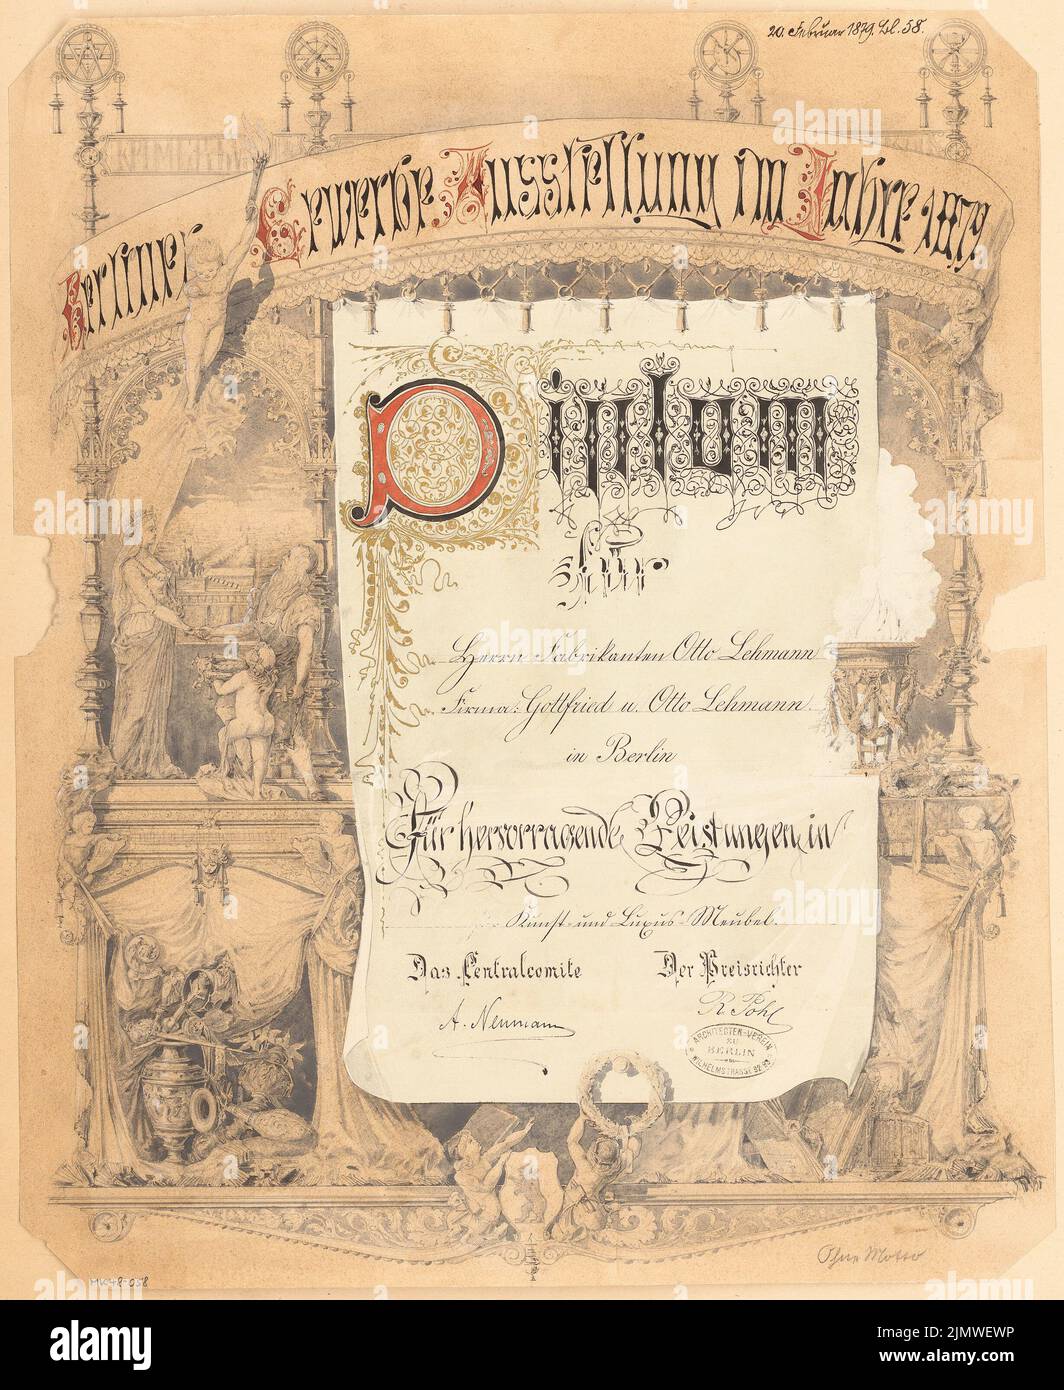 Unknown architect, diploma for the Berlin trade exhibition 1879. Monthly competition February 1879 (02.1879): View. Pencil watercolored and white heighted on paper, 54.4 x 44.5 cm (including scan edges) N.N. : Diplom für die Berliner Gewerbeausstellung 1879. Monatskonkurrenz Februar 1879 Stock Photo